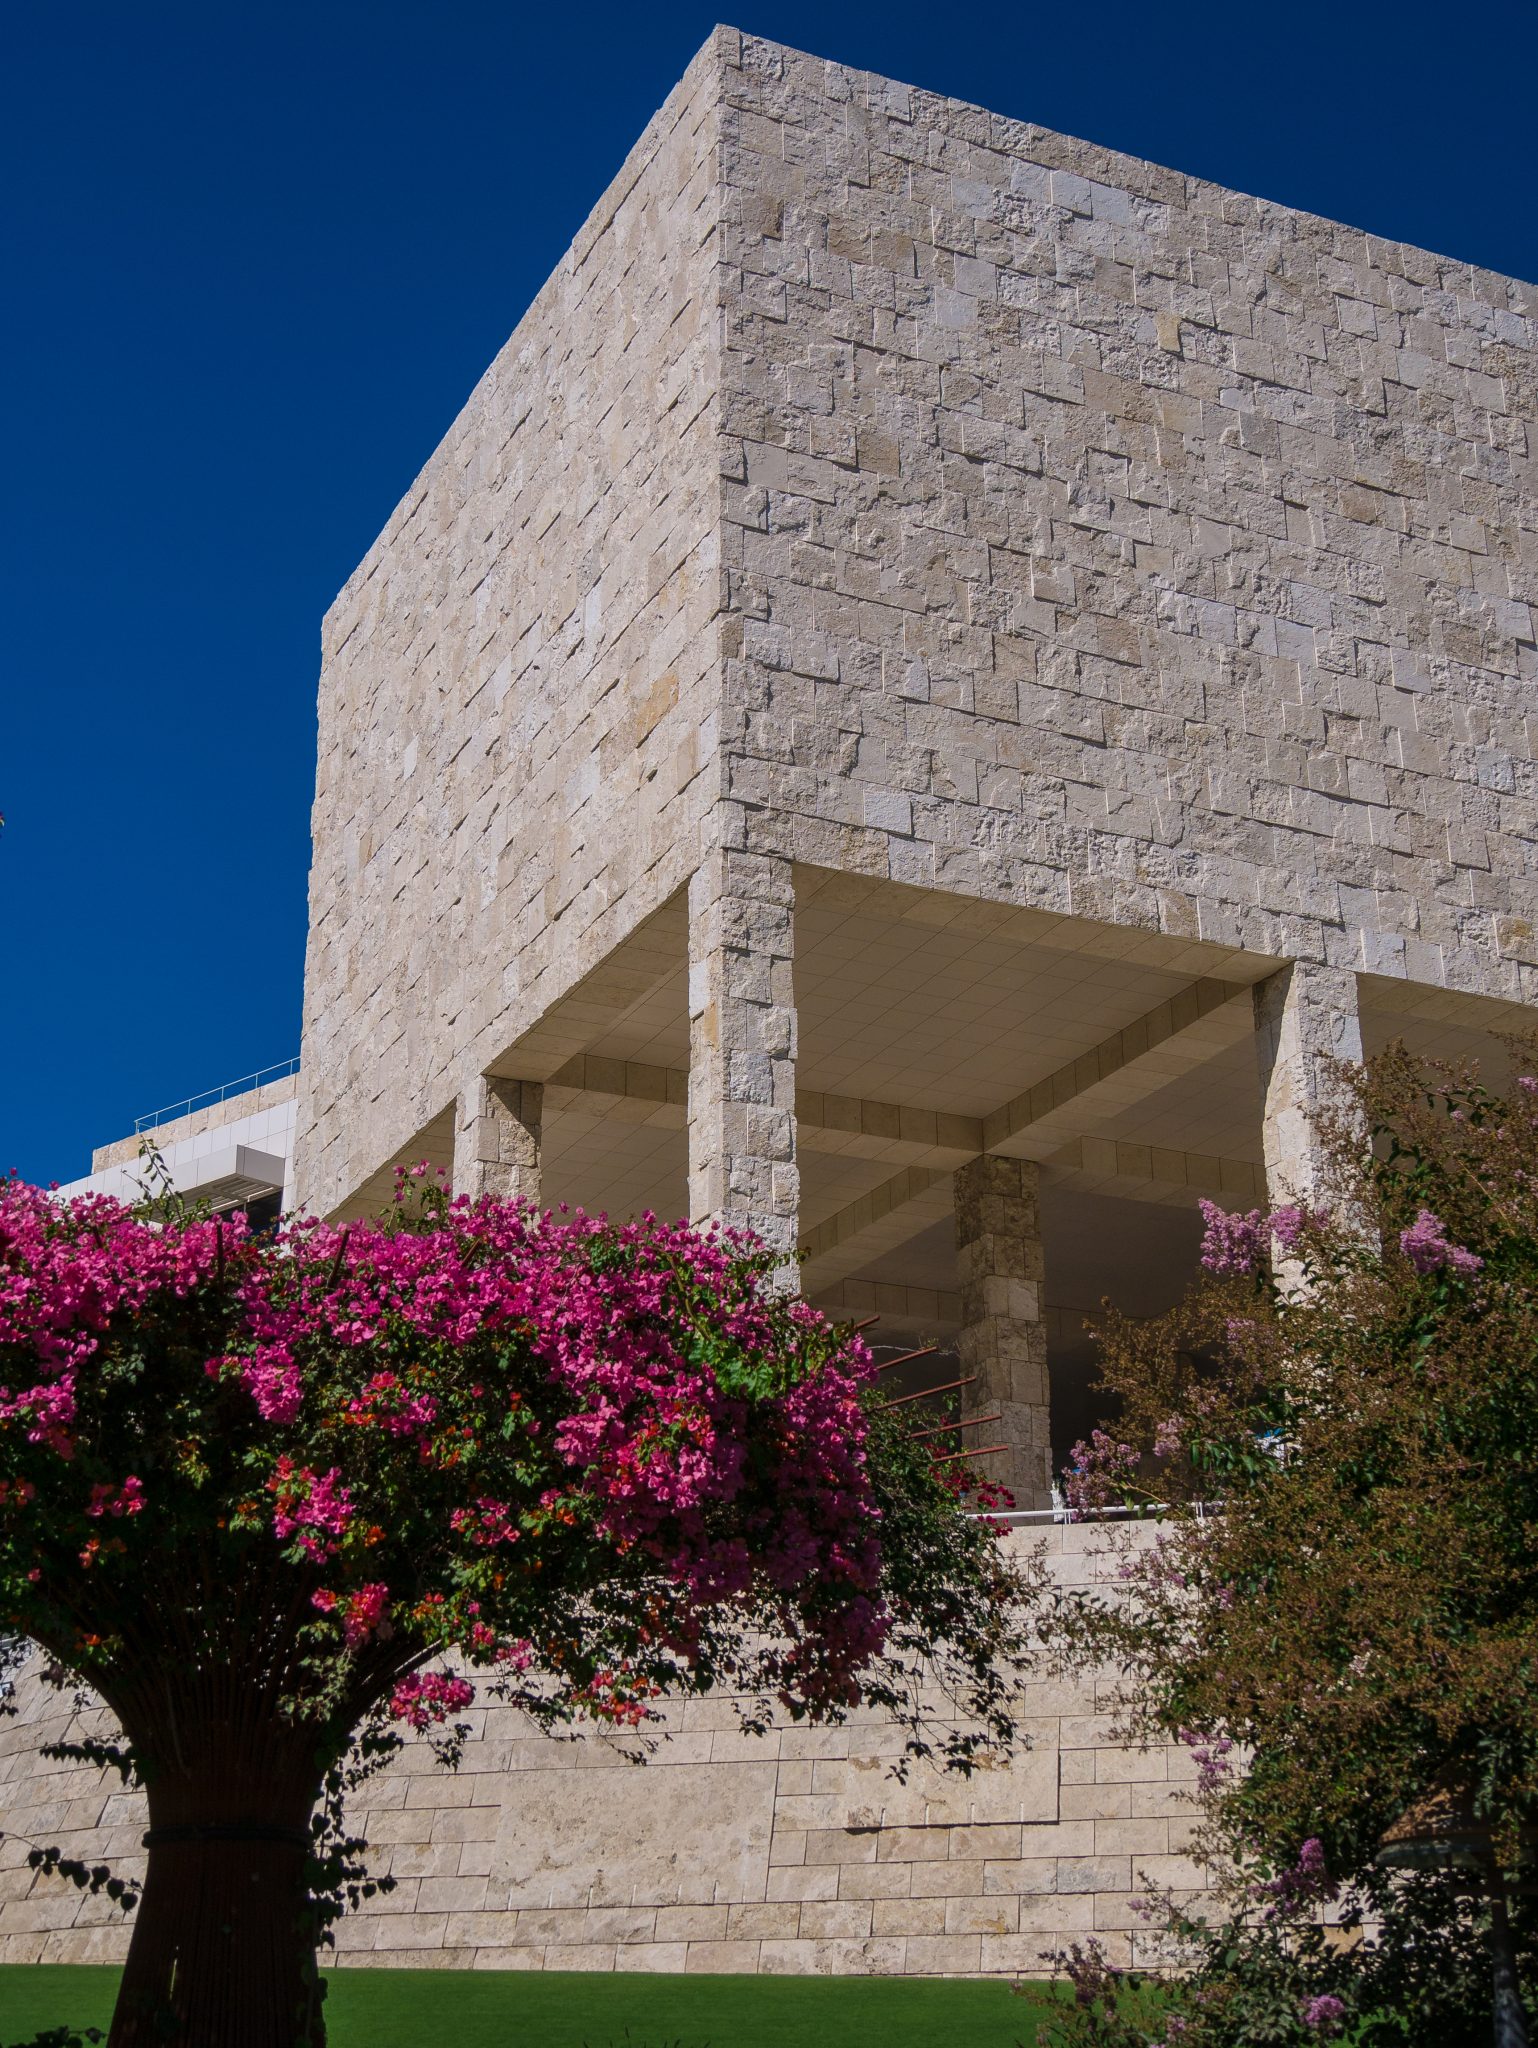 The Getty in Los Angeles, California